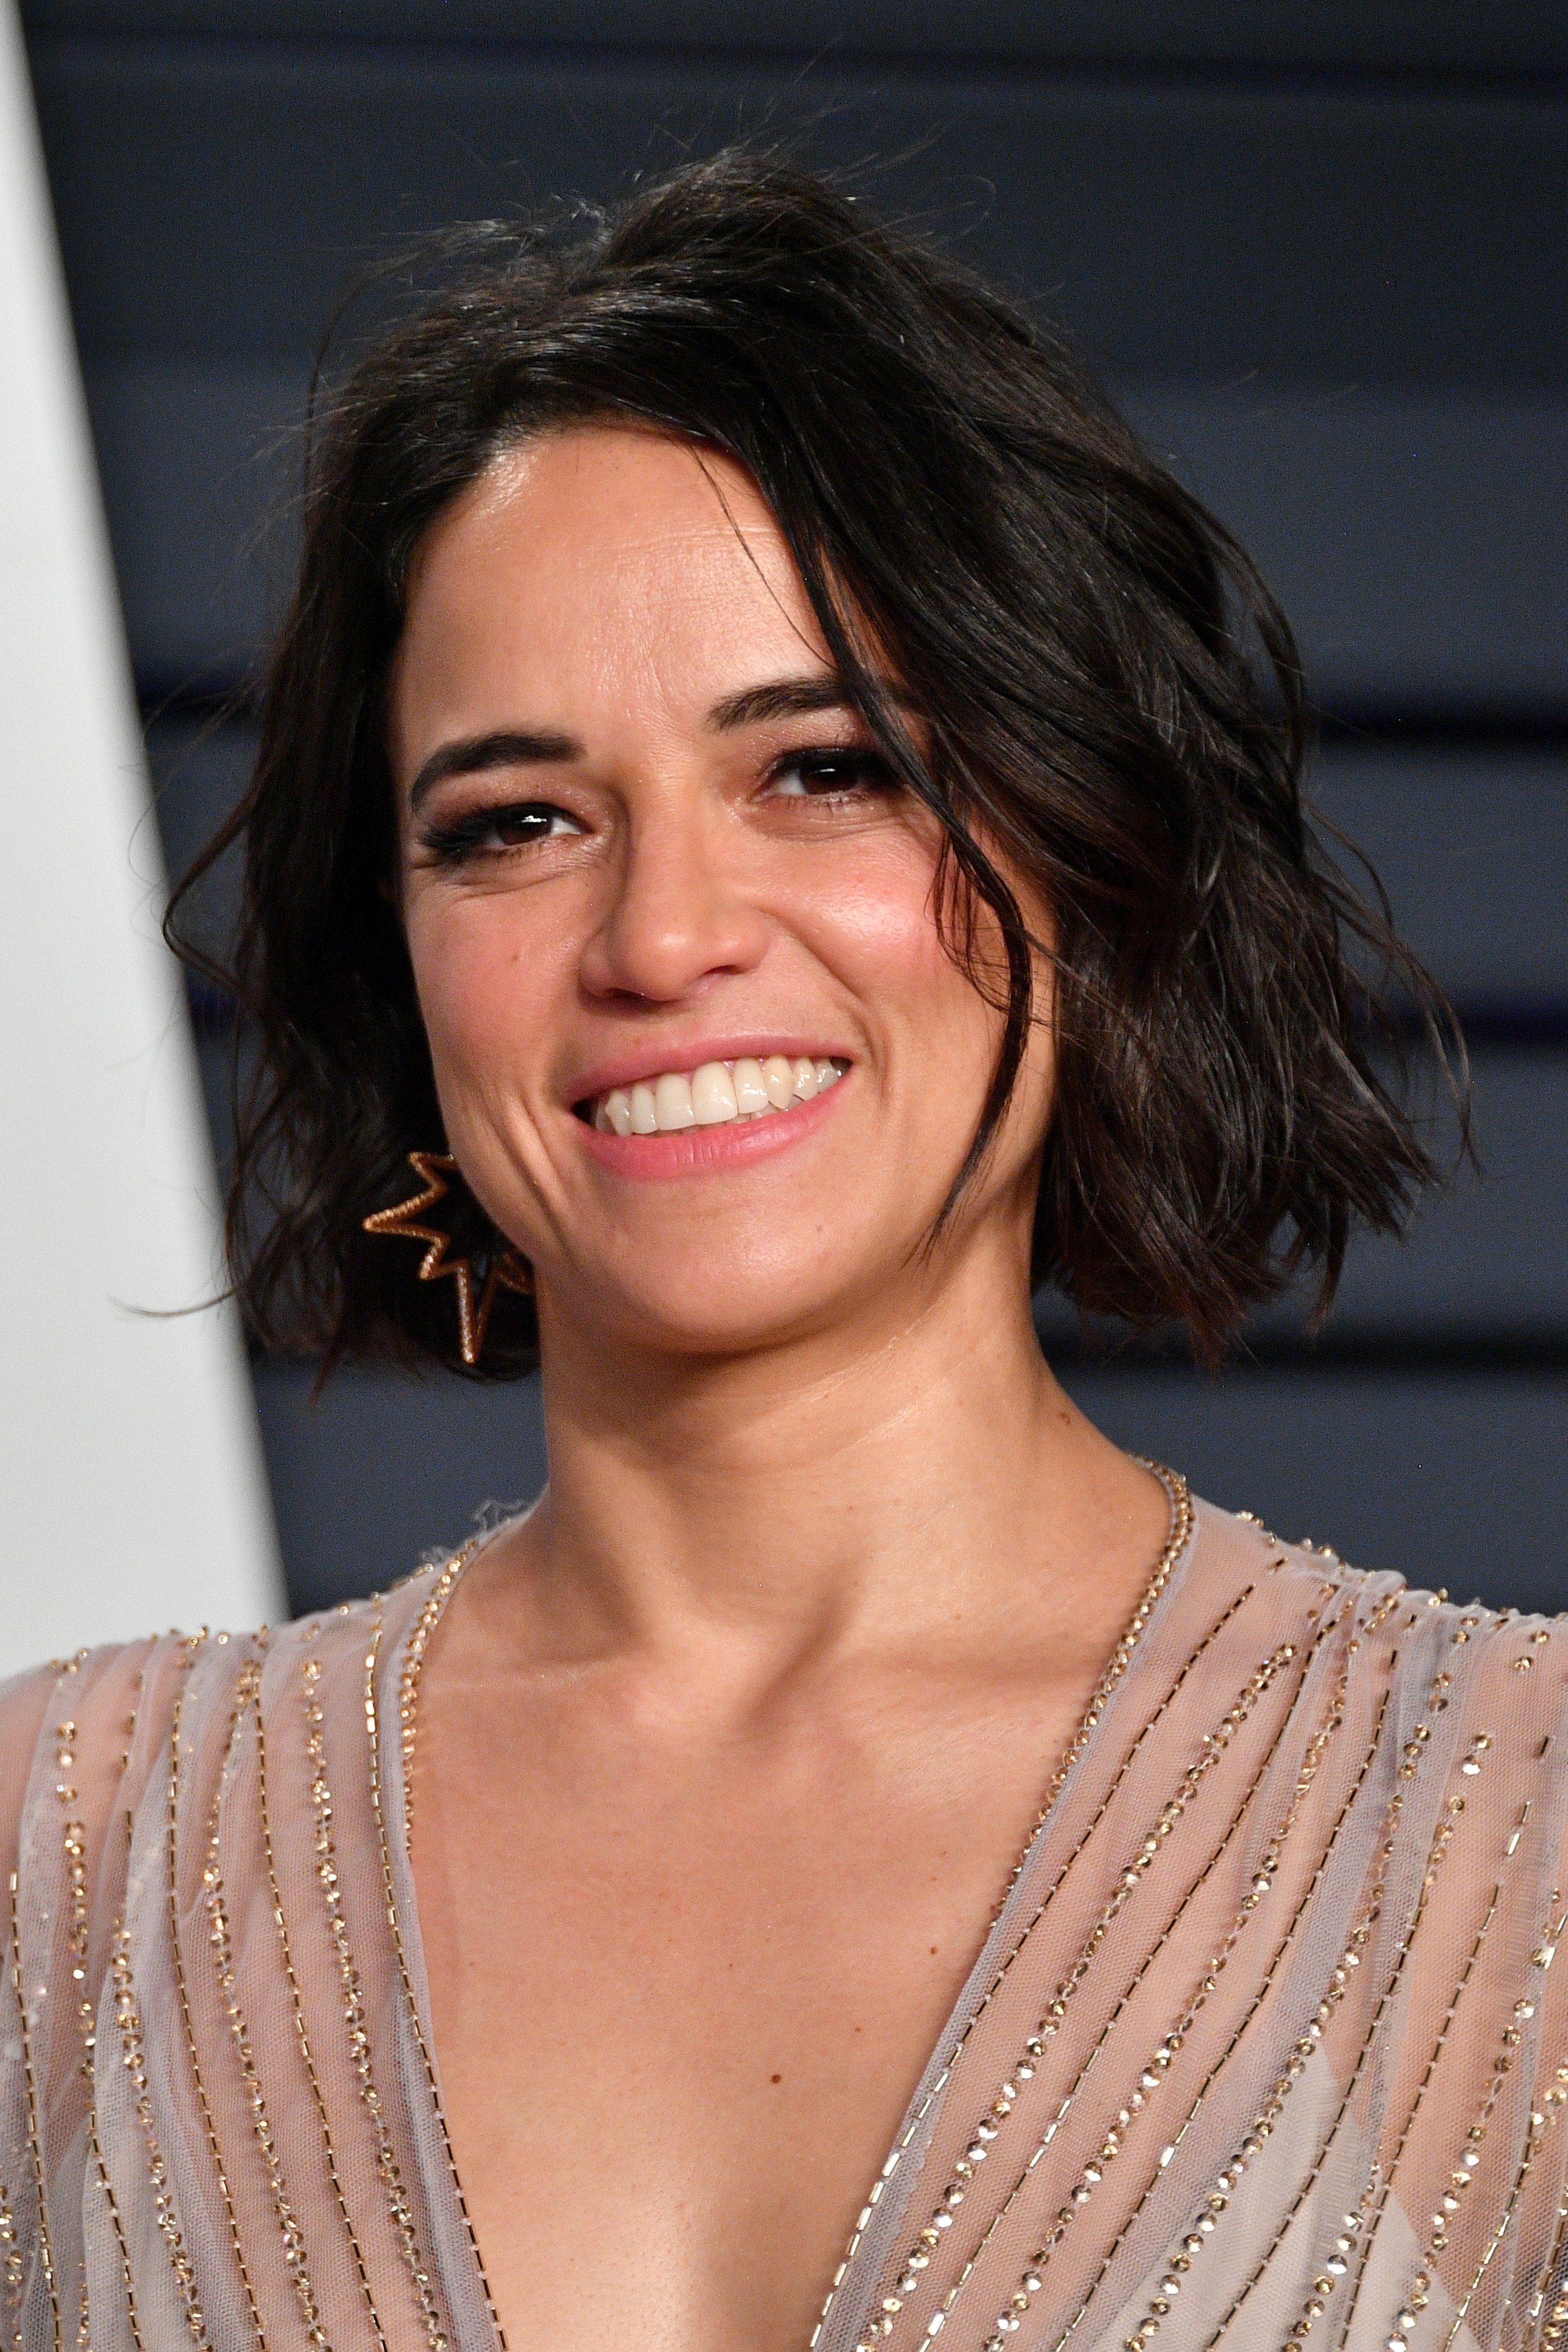 Michelle Rodriguez during the 2019 Vanity Fair Oscar Party at Wallis Annenberg Center for the Performing Arts on February 24, 2019, in Beverly Hills, California. | Source: Getty Images